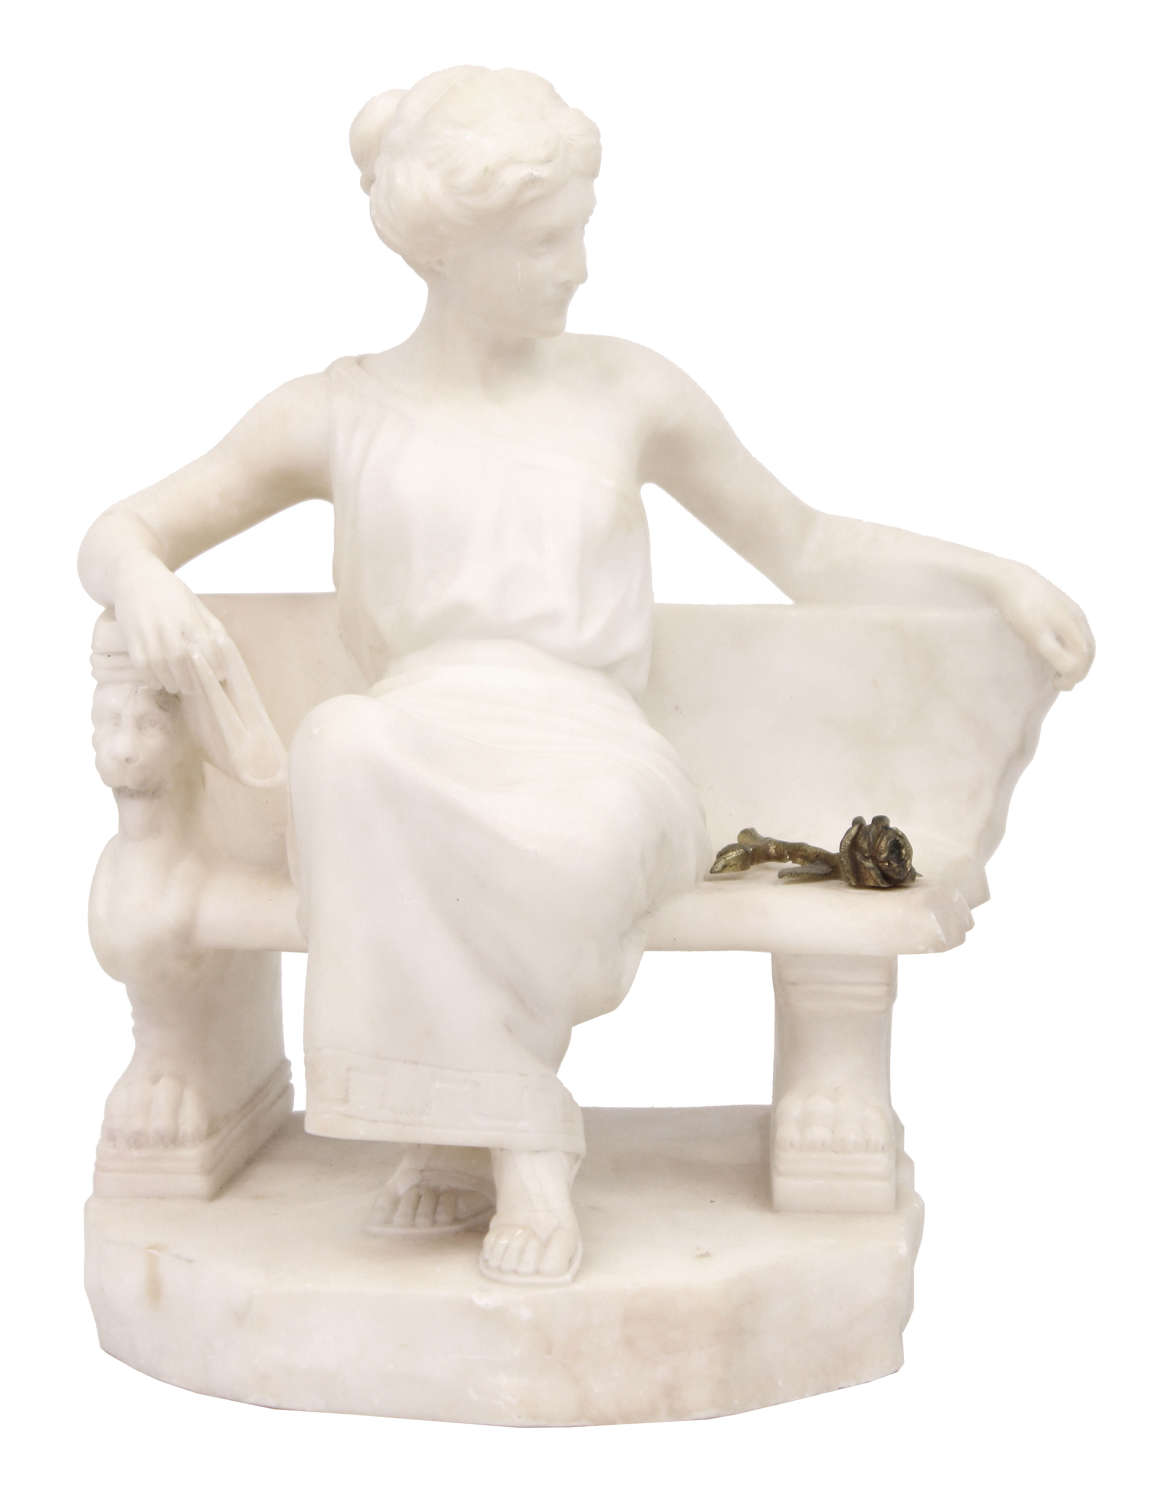 A 19th Century Marble sculpture modelled as a seated Maiden